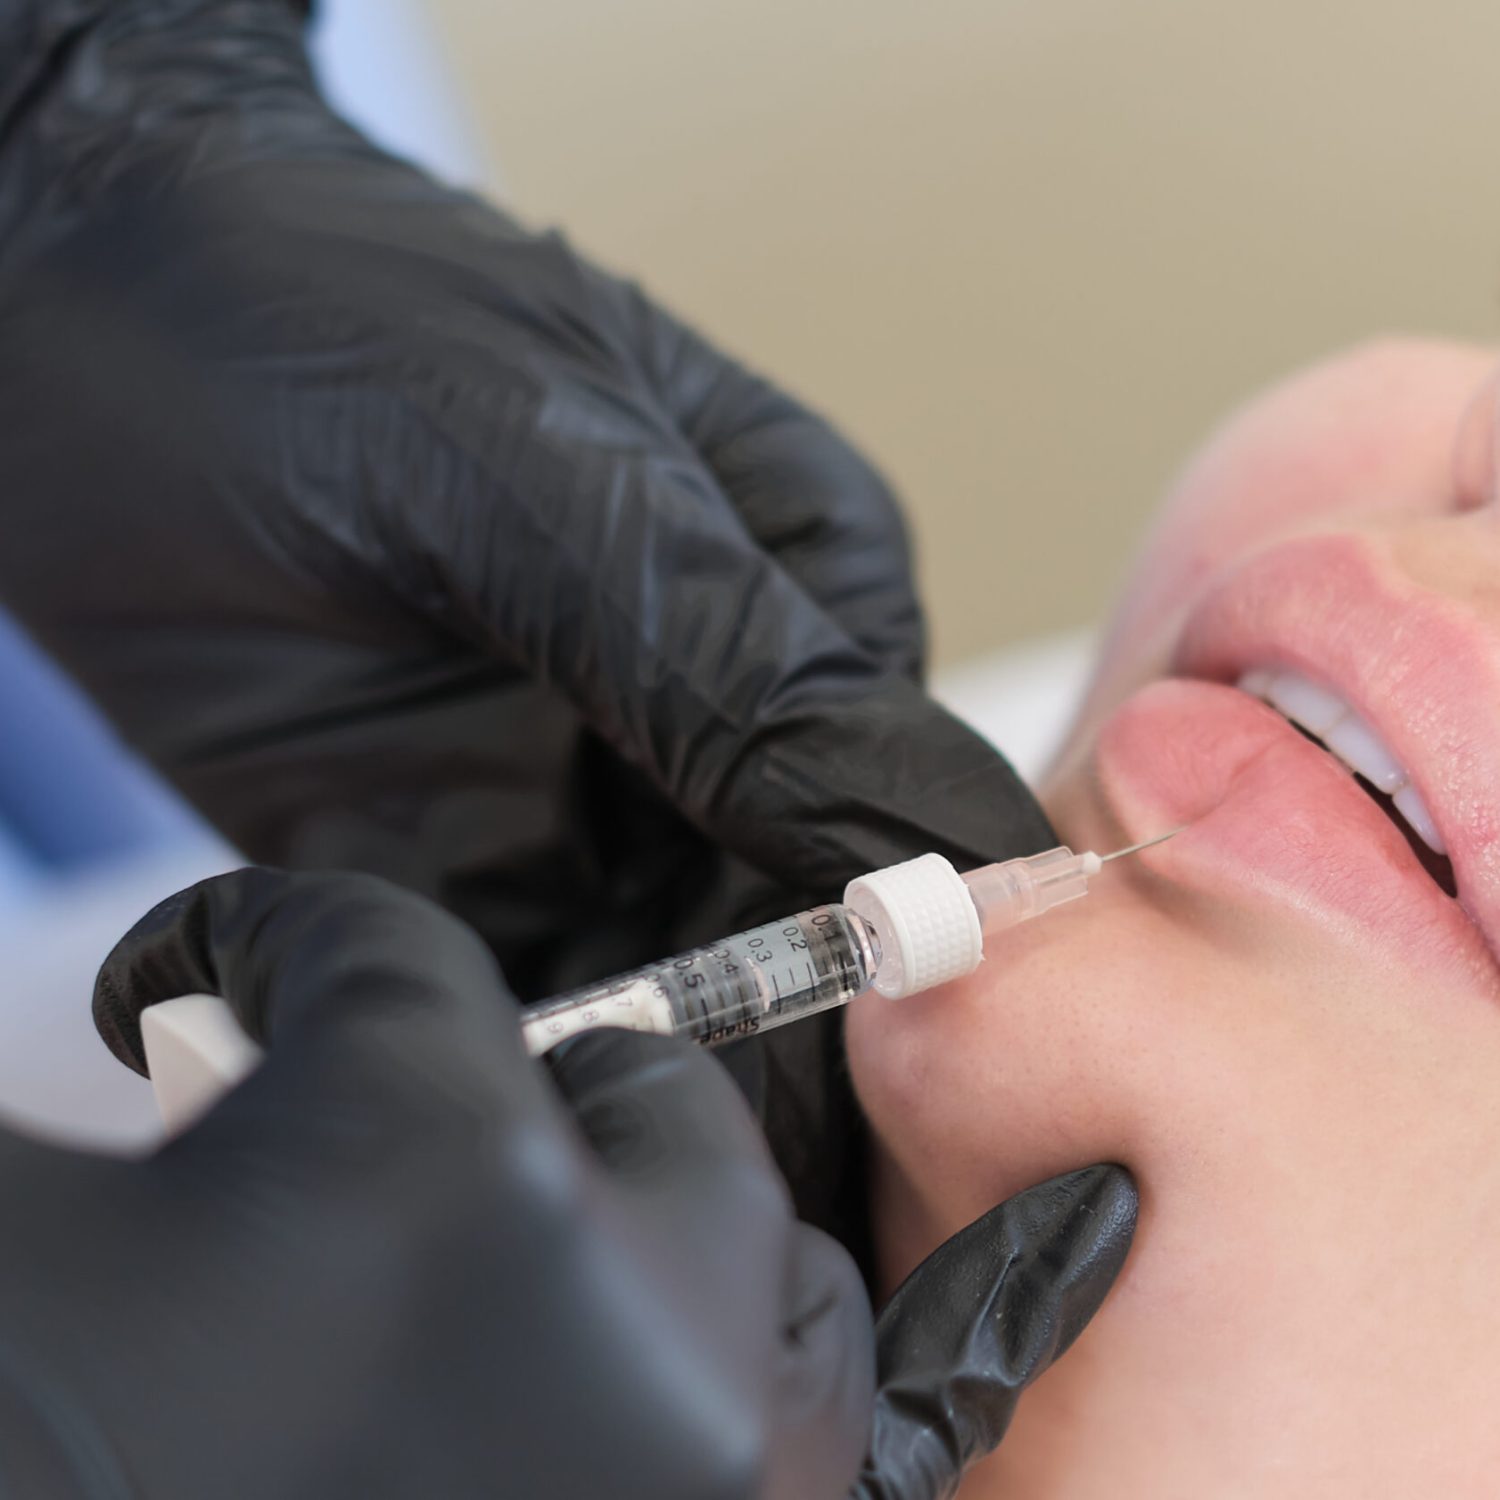 A cosmetologist carefully injects a client's lips. Enhancements come with both benefits and risks